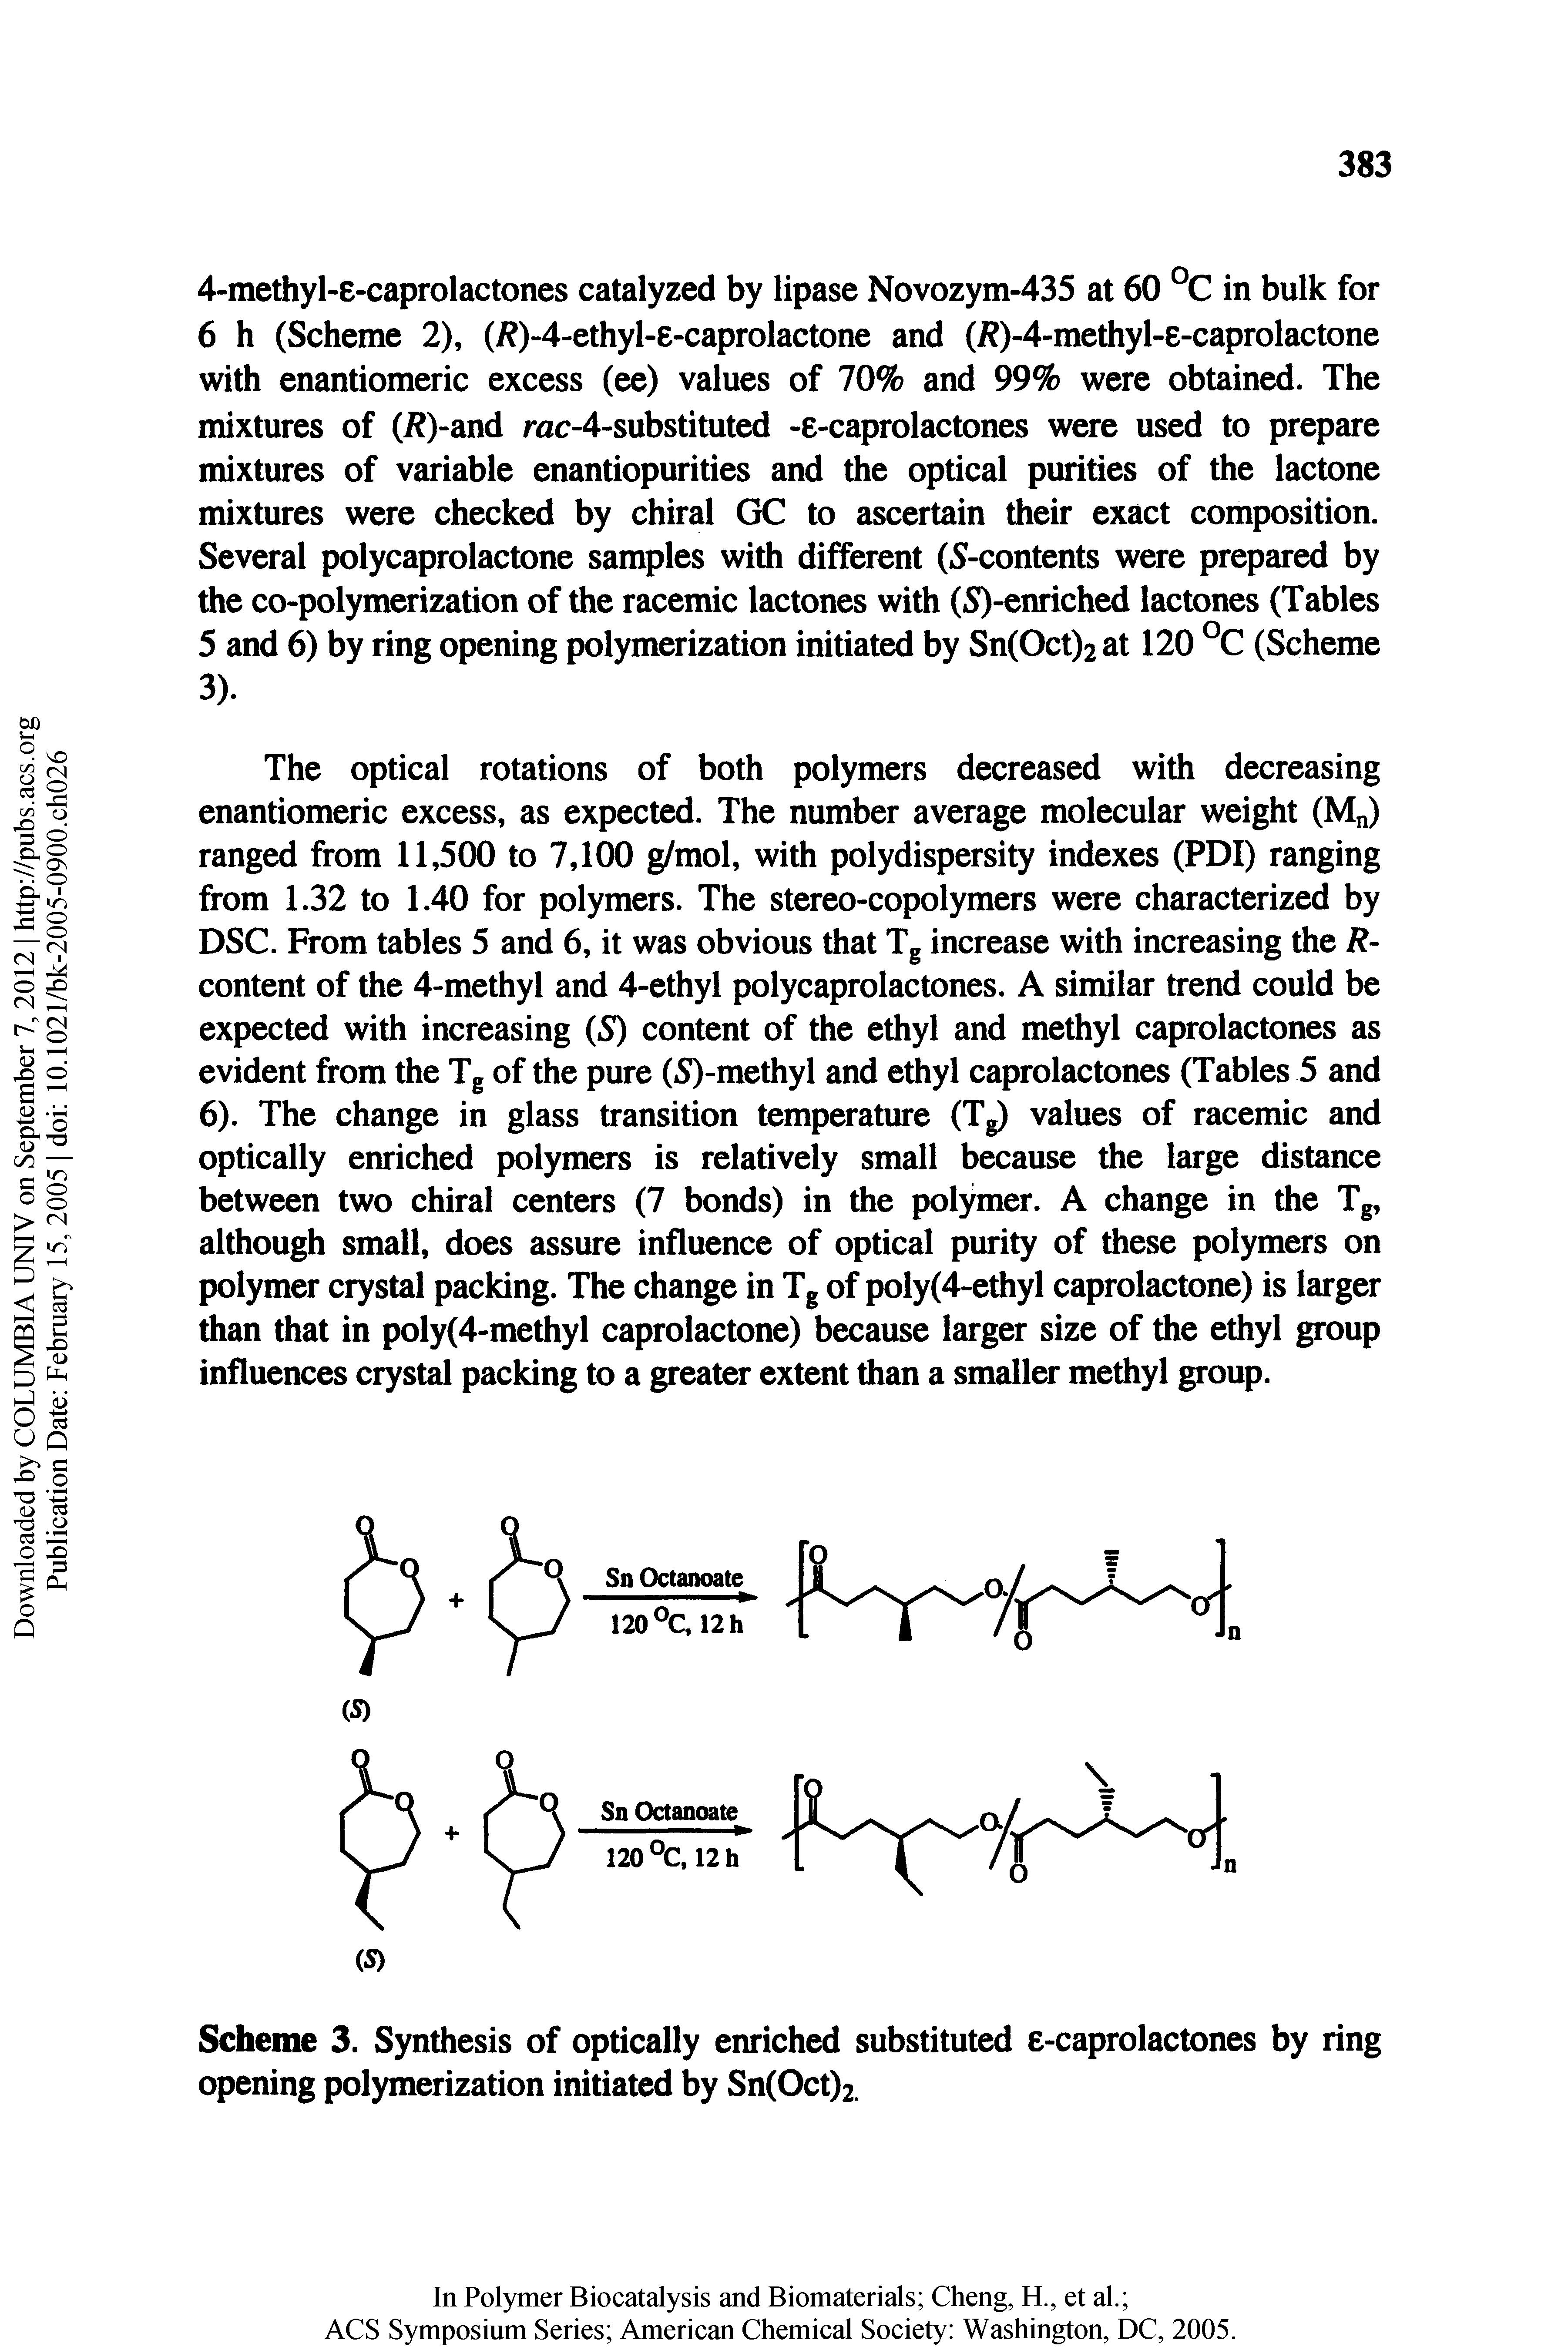 Scheme 3. Synthesis of optically enriched substituted e-caprolactones by ring opening polymerization initiated by Sn(Oct)2.